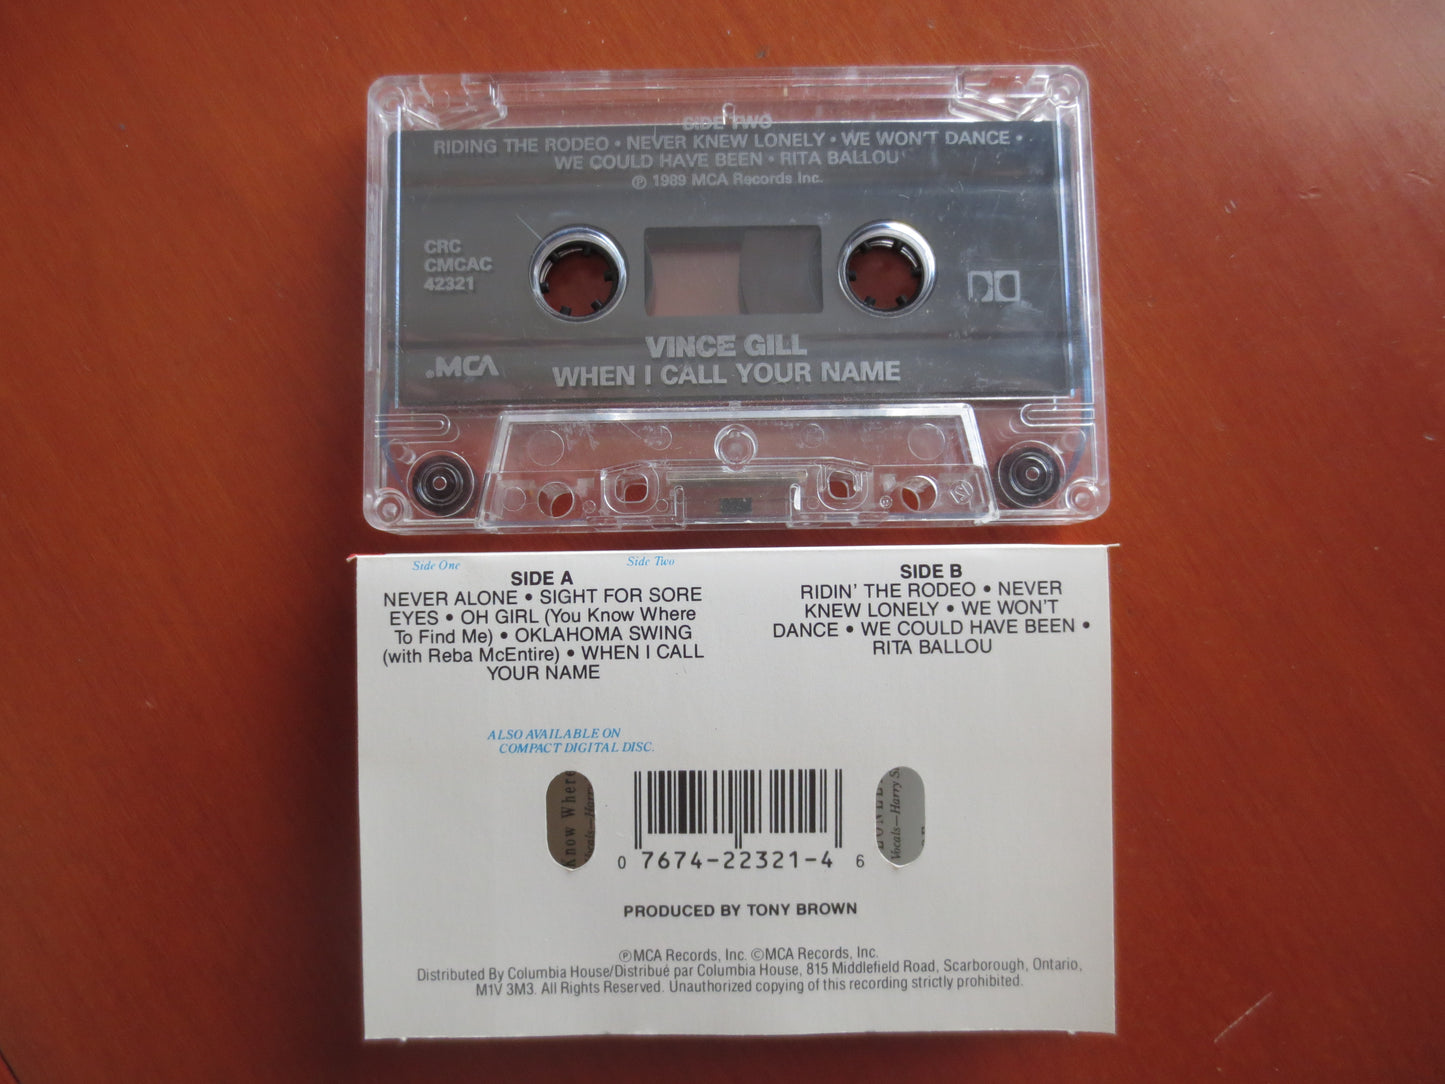 VINCE GILL Tape, When I CALL Your Name, Vince Gill Music, Tape Cassette, Vince Gill Cassette, Vince Gill Song, 1989 Cassette